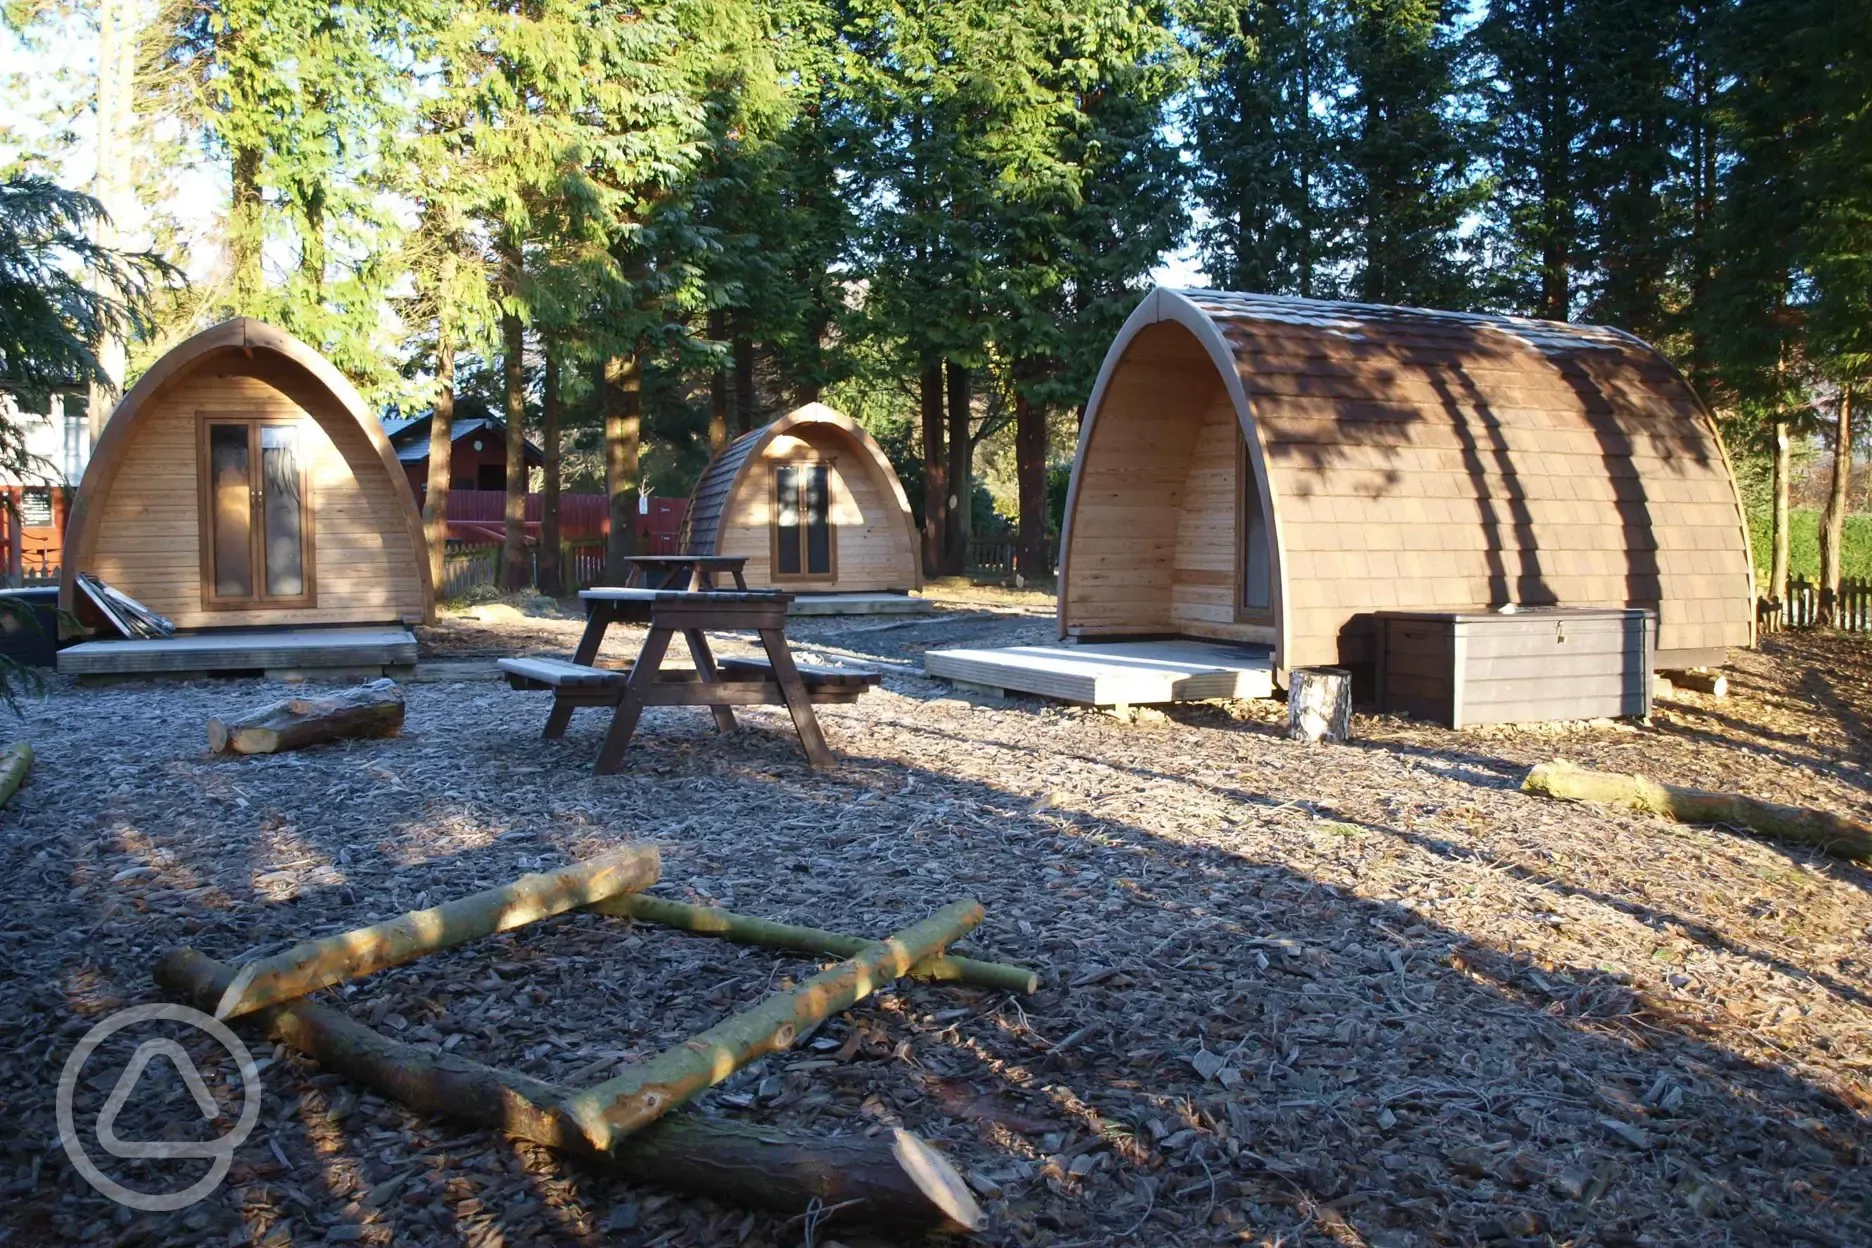 Camping Pods at Bellingham Club Site